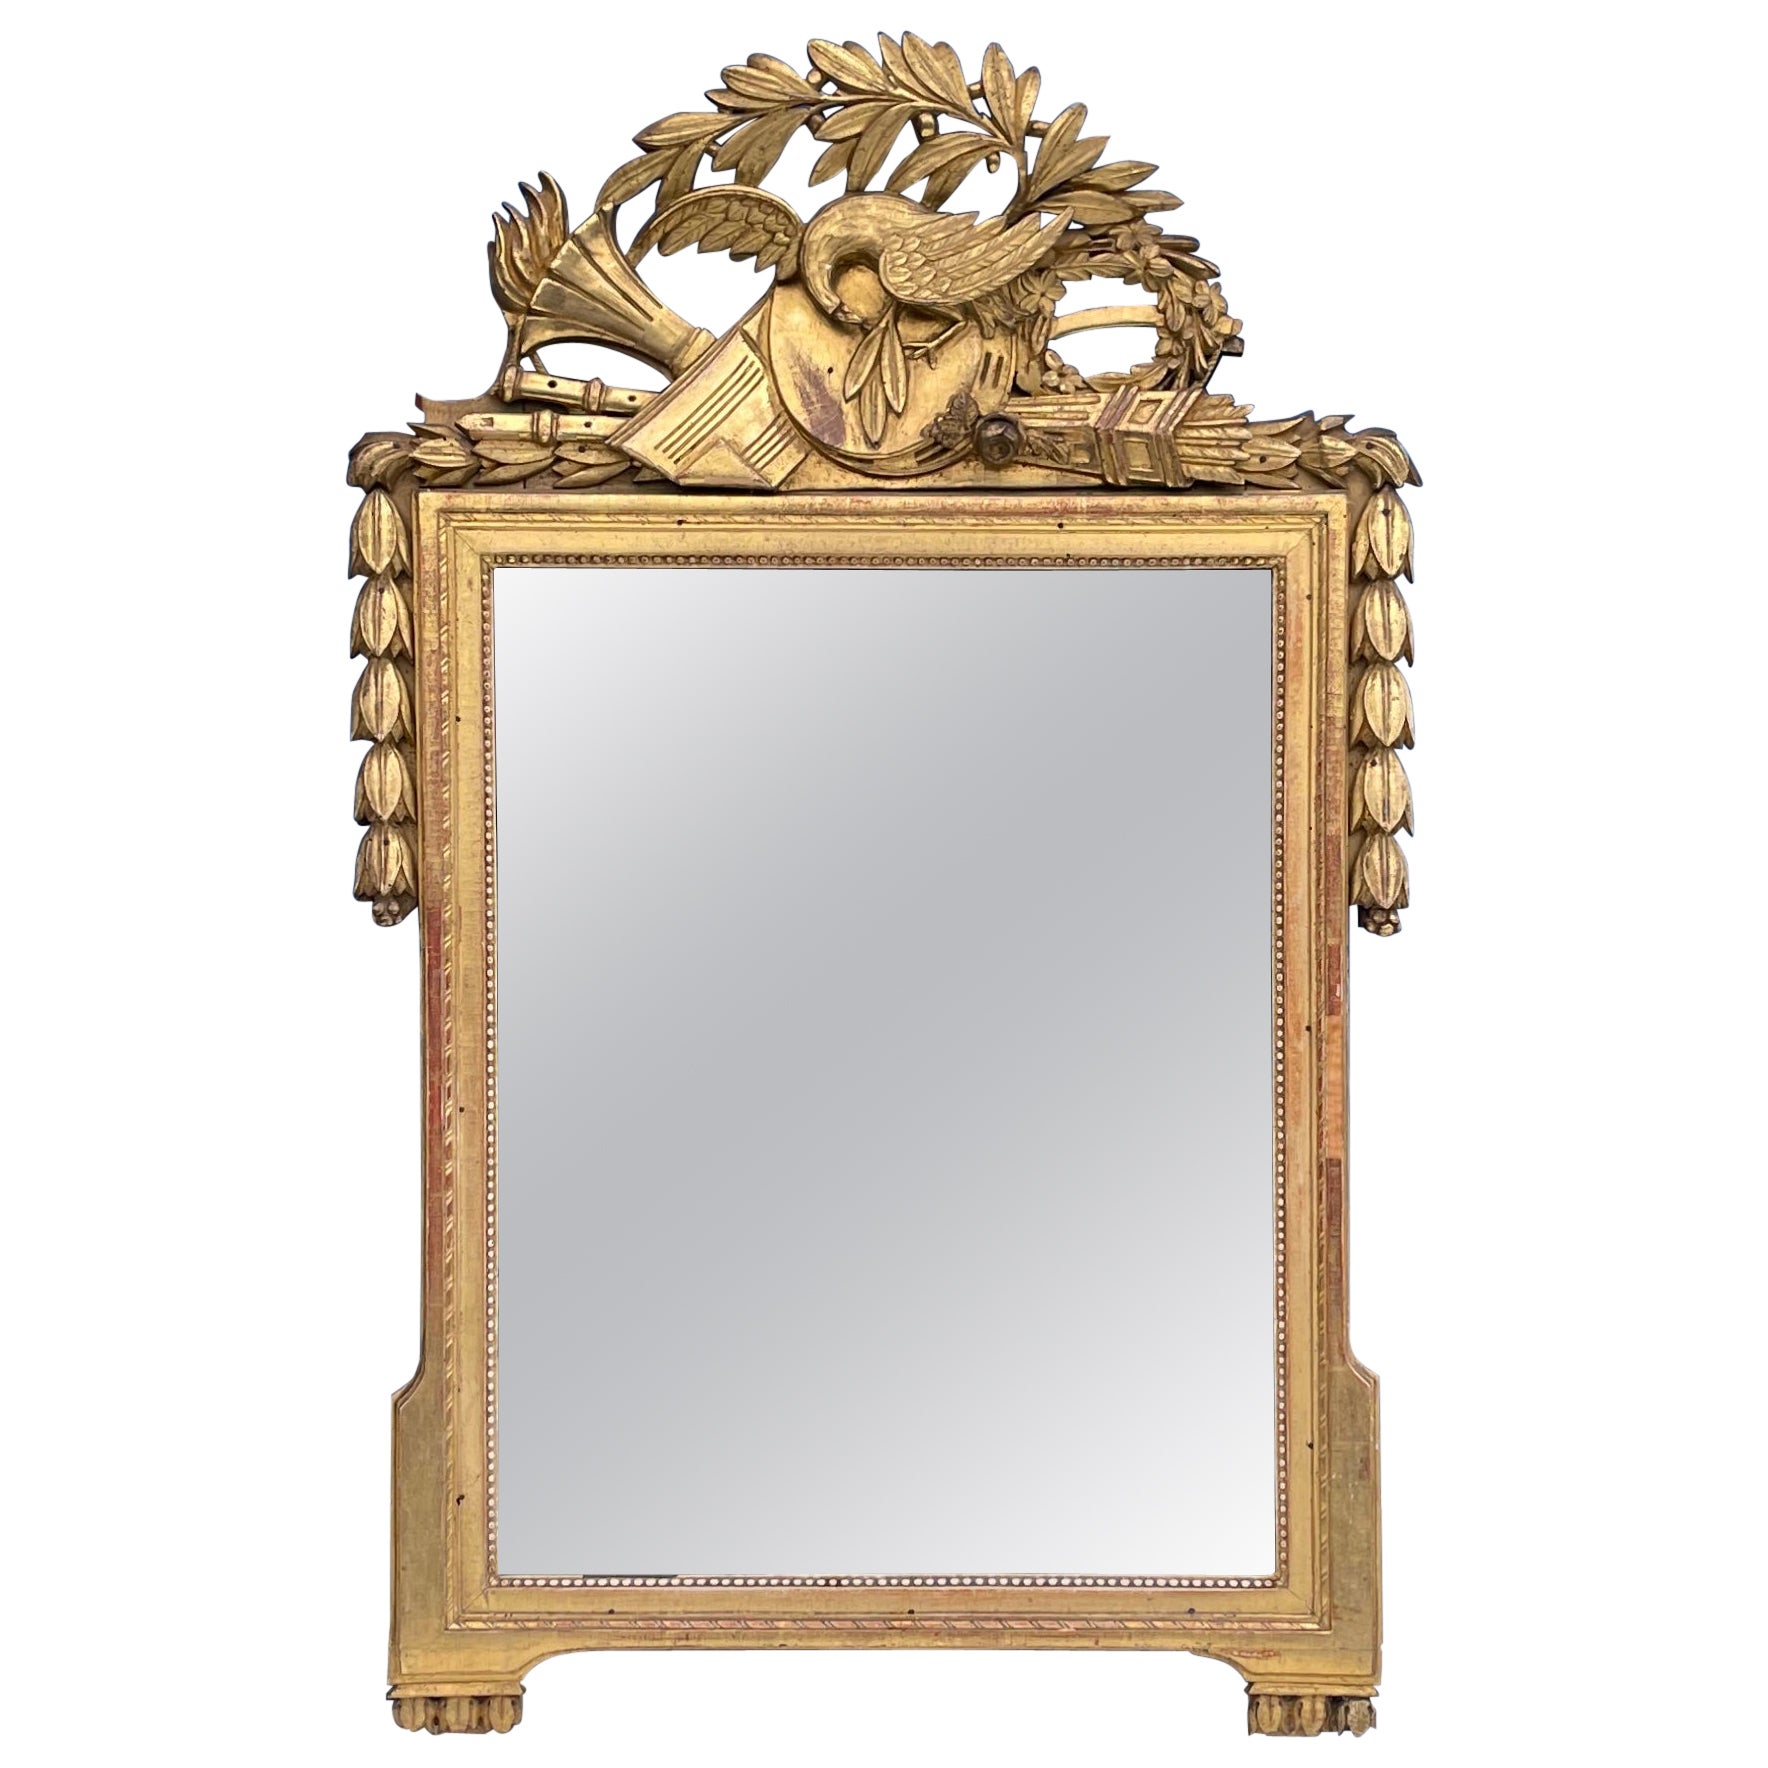 19th Century French Neo-Classical Style Carved Giltwood Mirror